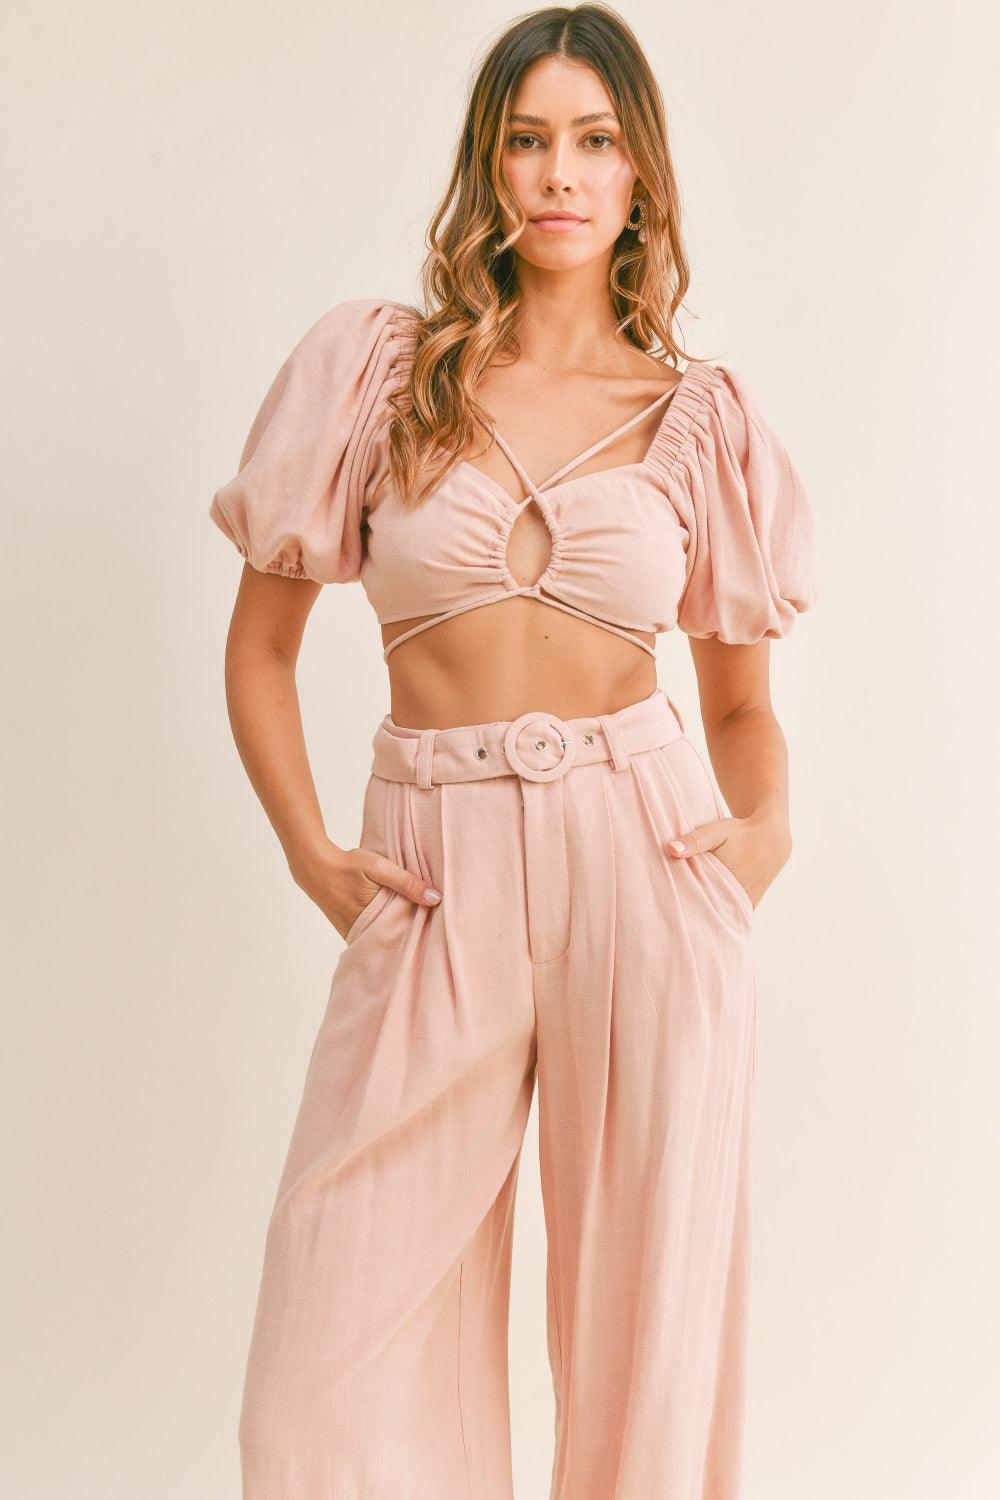 MABLE Cut Out Drawstring Crop Top and Belted Pants Set - Jessiz Boutique